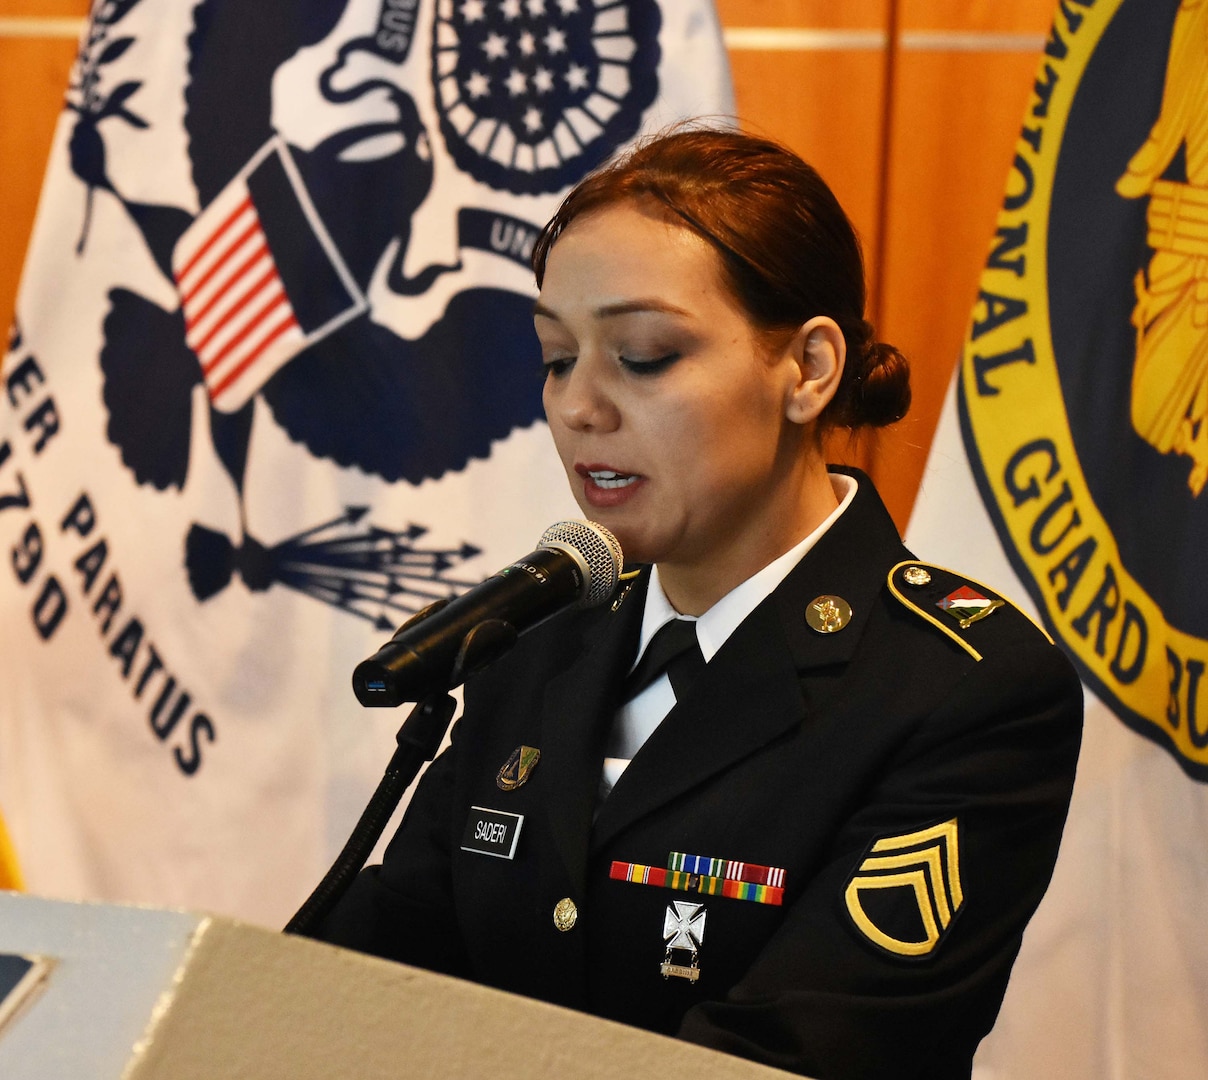 New York Army National Guard Soldier Staff Sgt. Norma Saderi, Joint Task Force-Empire Shield, translates from English to Portuguese for a state partnership signing, on the USS Intrepid, Manhattan, New York, March 14, 2019.